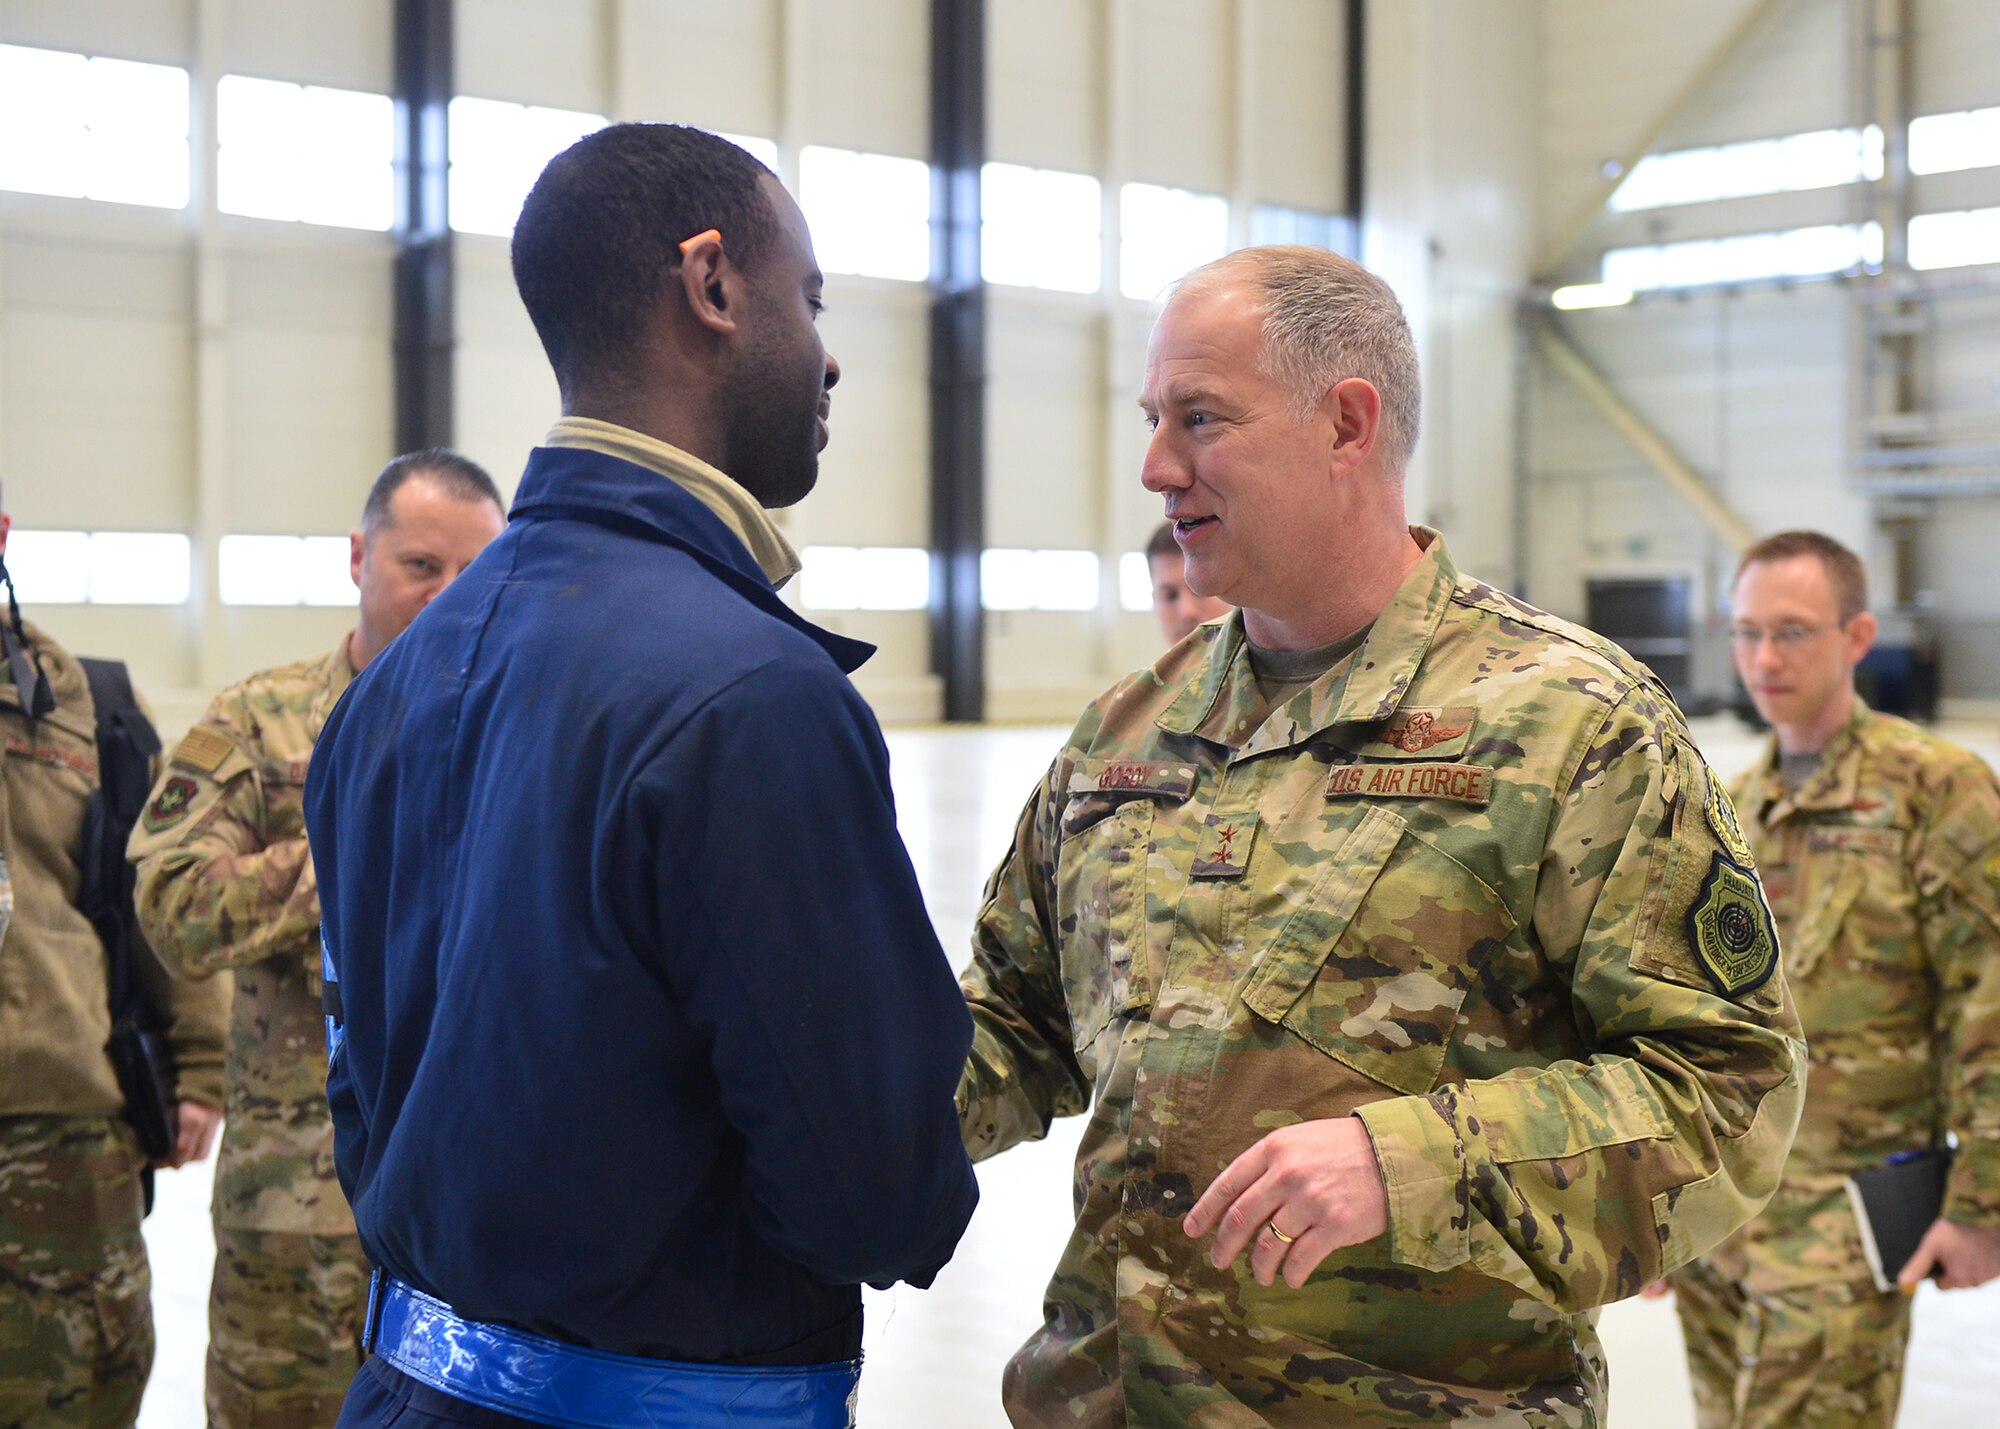 U.S. Air Force Maj. Gen. John Gordy, U.S. Air Force Expeditionary Center commander, hands a coin to Staff Sgt. Reuben Bowers, 721 Aircraft Maintenance Squadron C-17 Globemaster crew chief craftsman, for outstanding performance in his unit at Ramstein Air Base, Germany, March 14, 2019.